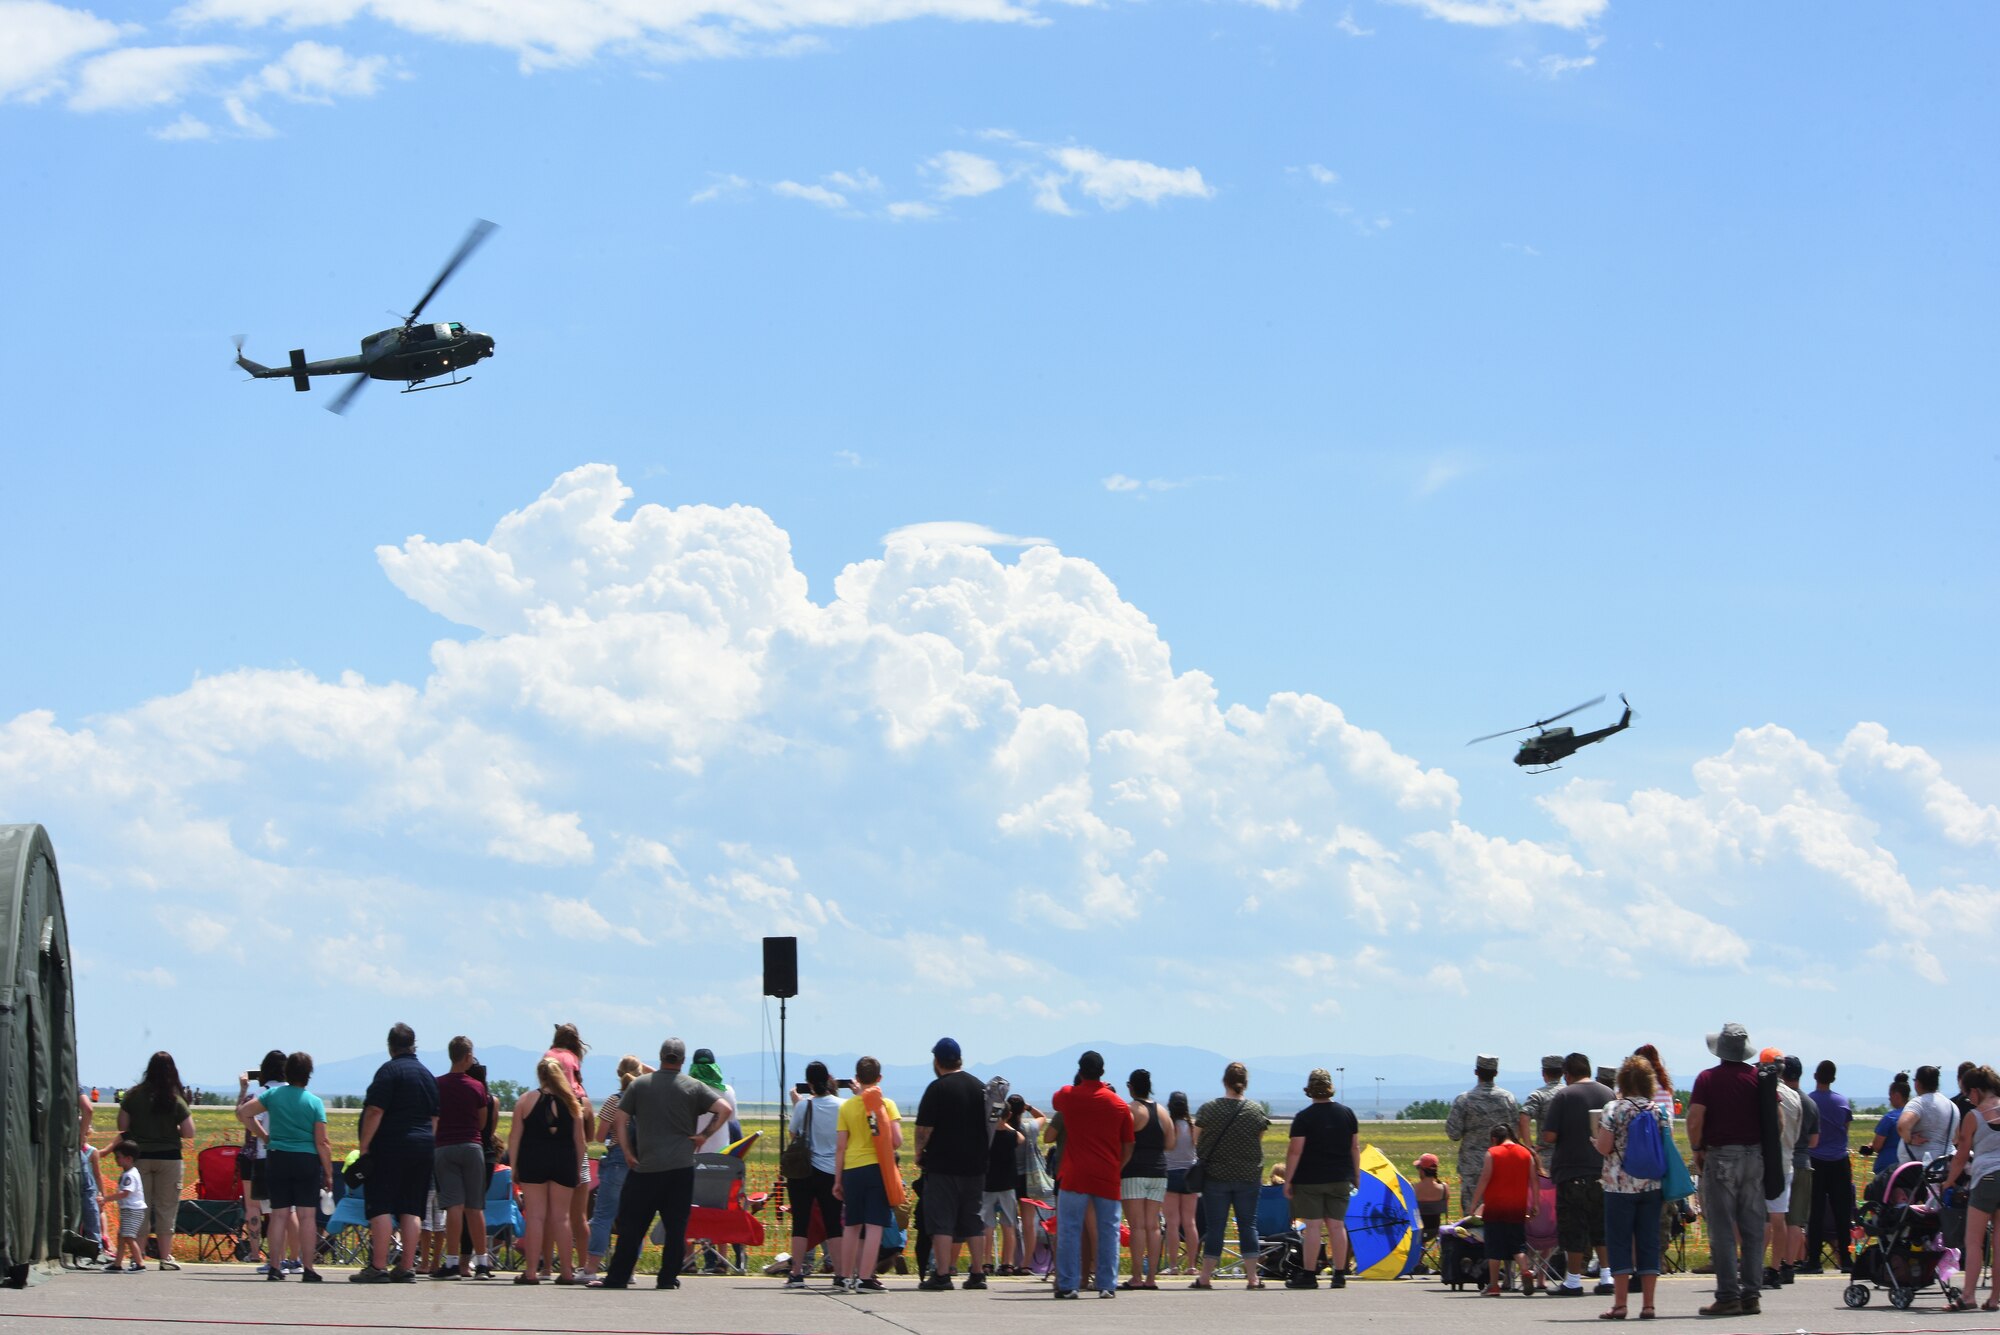 Two UH-1N helicopters with the 40th Helicopter Squadron perform flight maneuvers July 13, 2019, at the “Mission Over Malmstrom” open house event on Malmstrom Air Force Base, Mont.